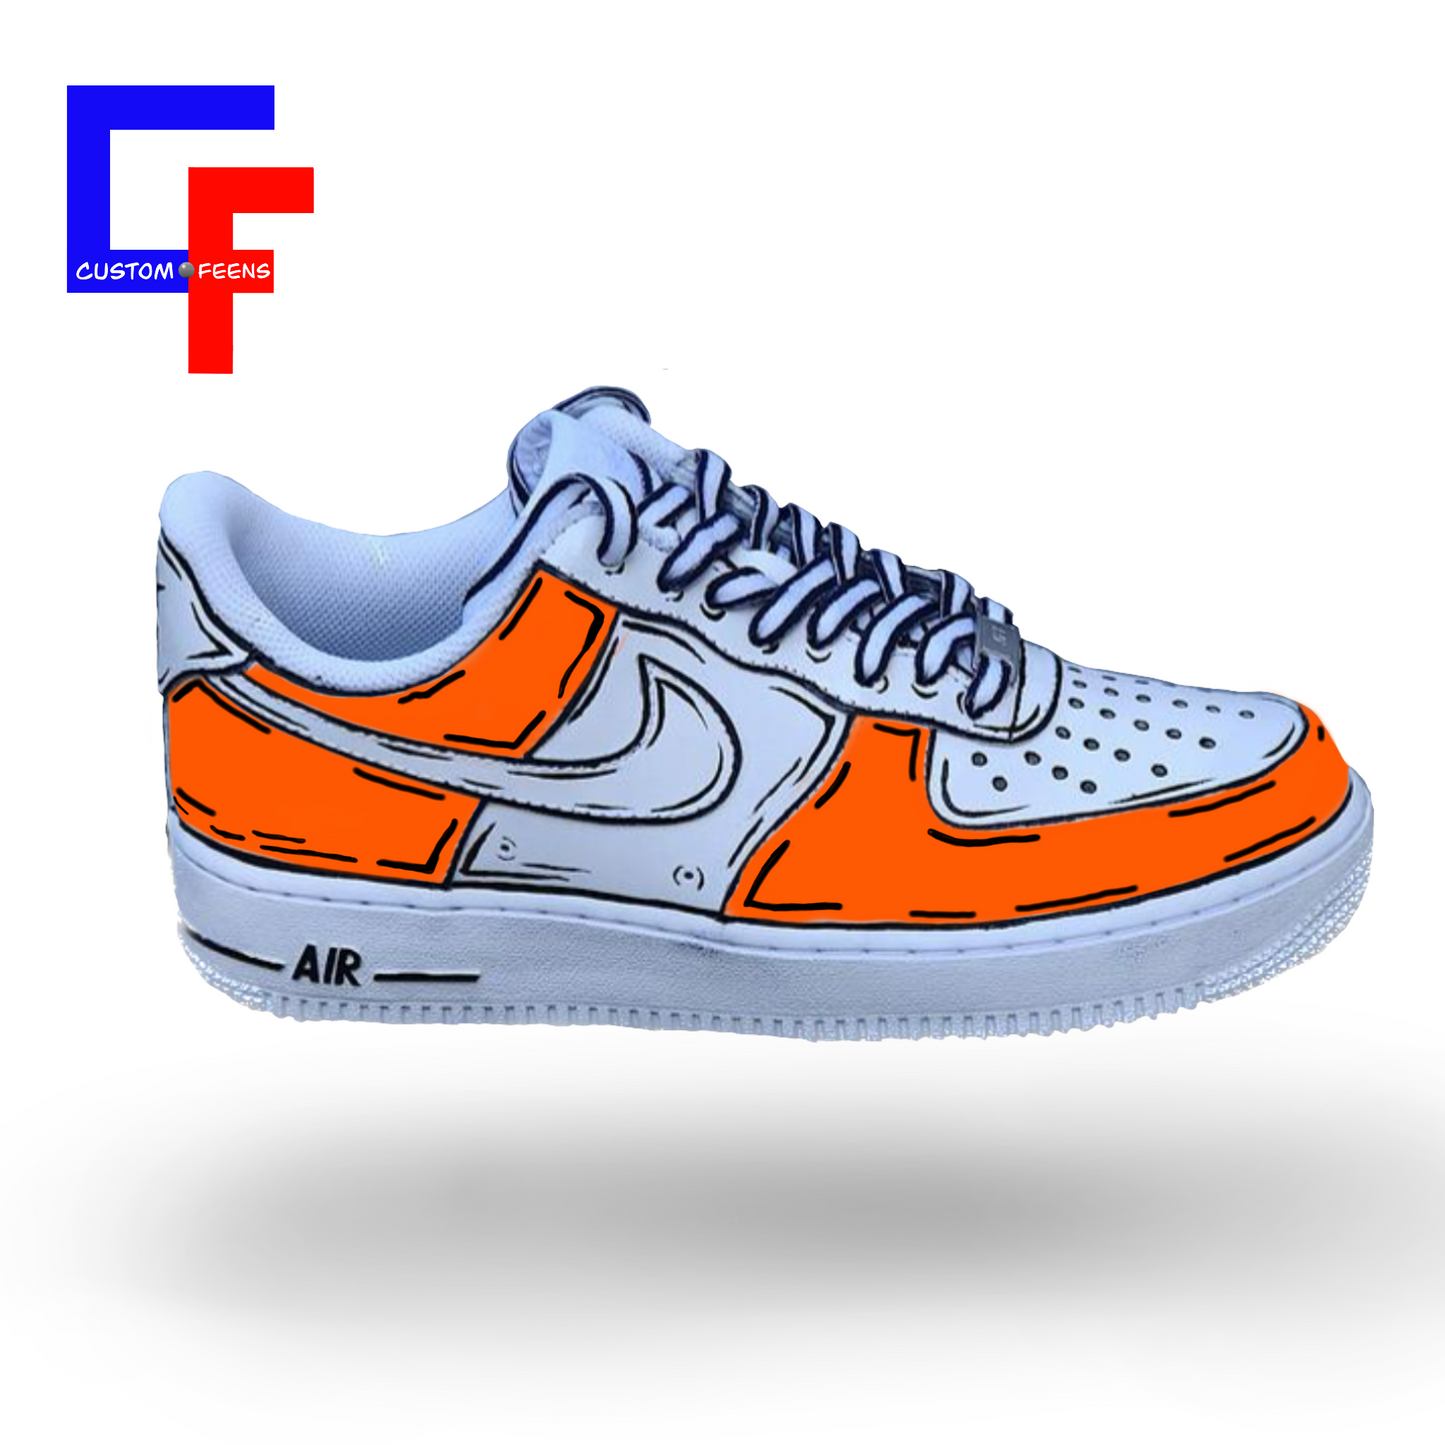 Air Force 1 Custom Low Cartoon Yellow Shoes White Black Outline Mens Womens Af1 Sneakers 12 Mens (13.5 Women's)